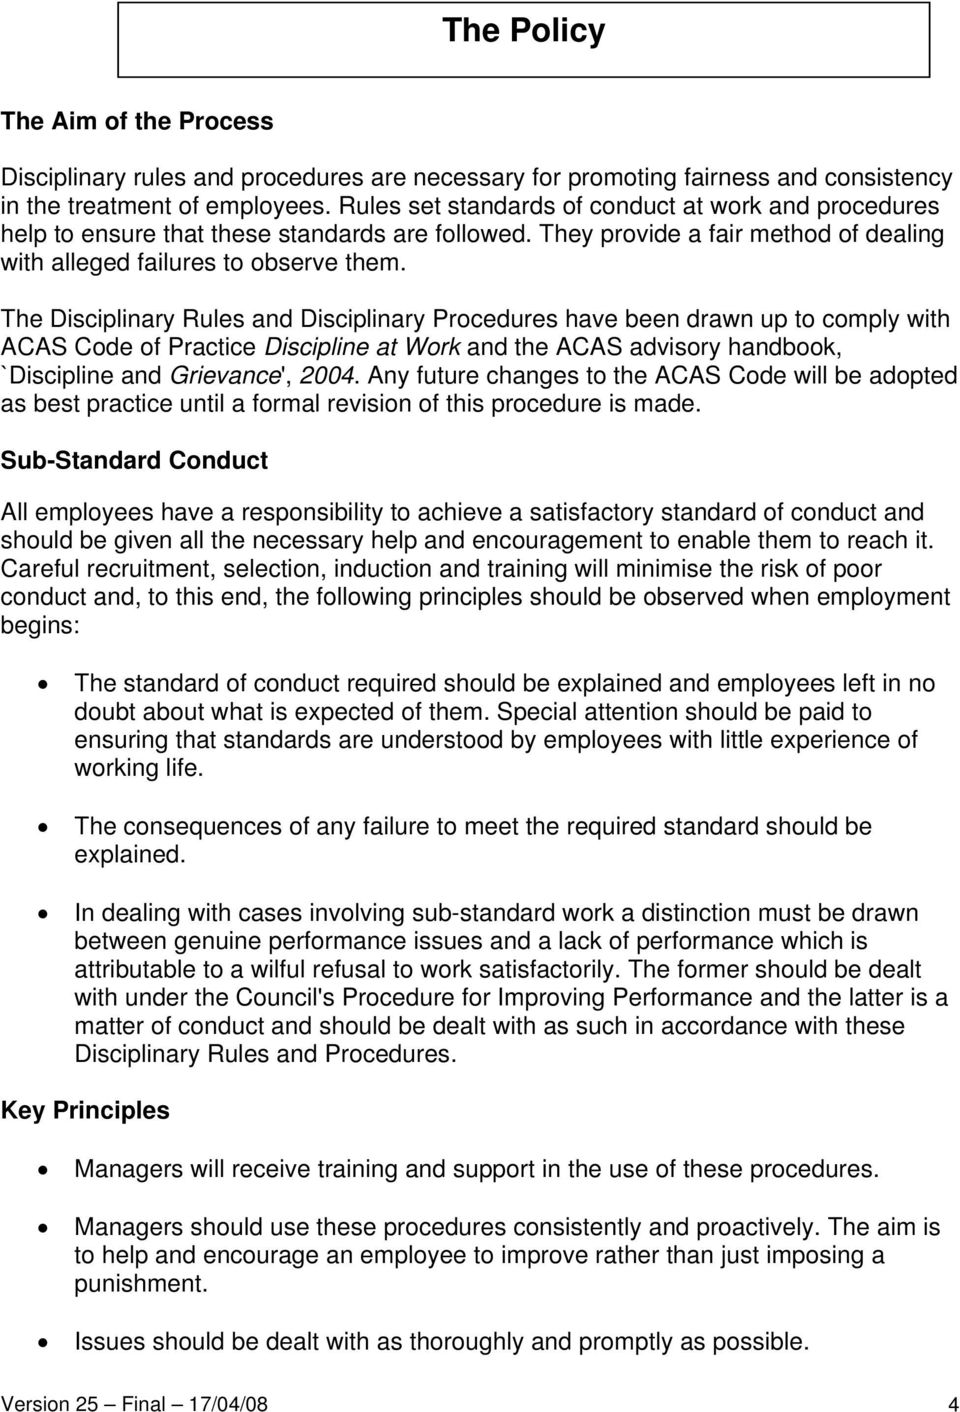 The Disciplinary Rules and Disciplinary Procedures have been drawn up to comply with ACAS Code of Practice Discipline at Work and the ACAS advisory handbook, `Discipline and Grievance', 2004.